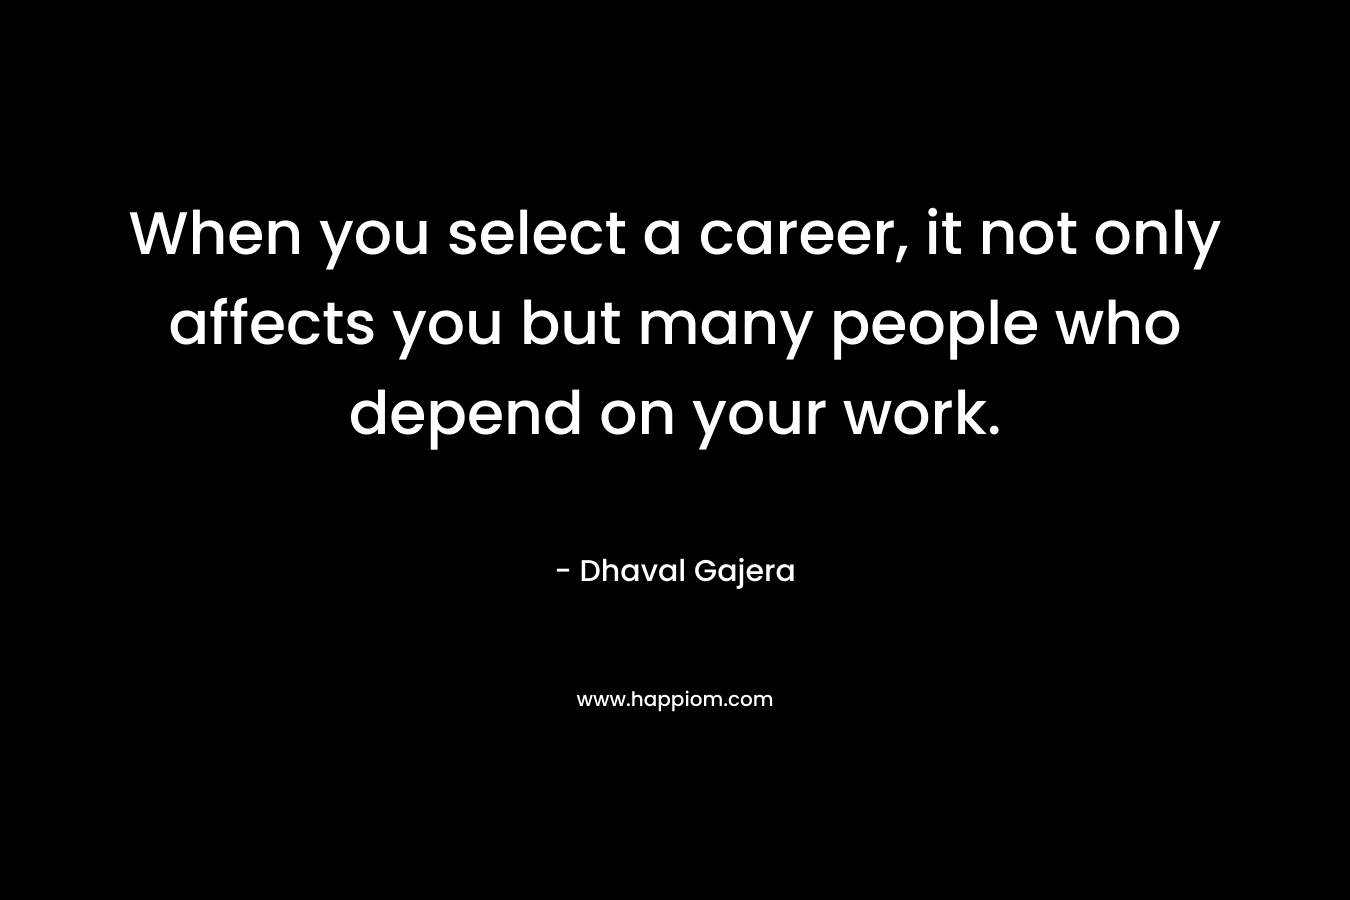 When you select a career, it not only affects you but many people who depend on your work. – Dhaval Gajera